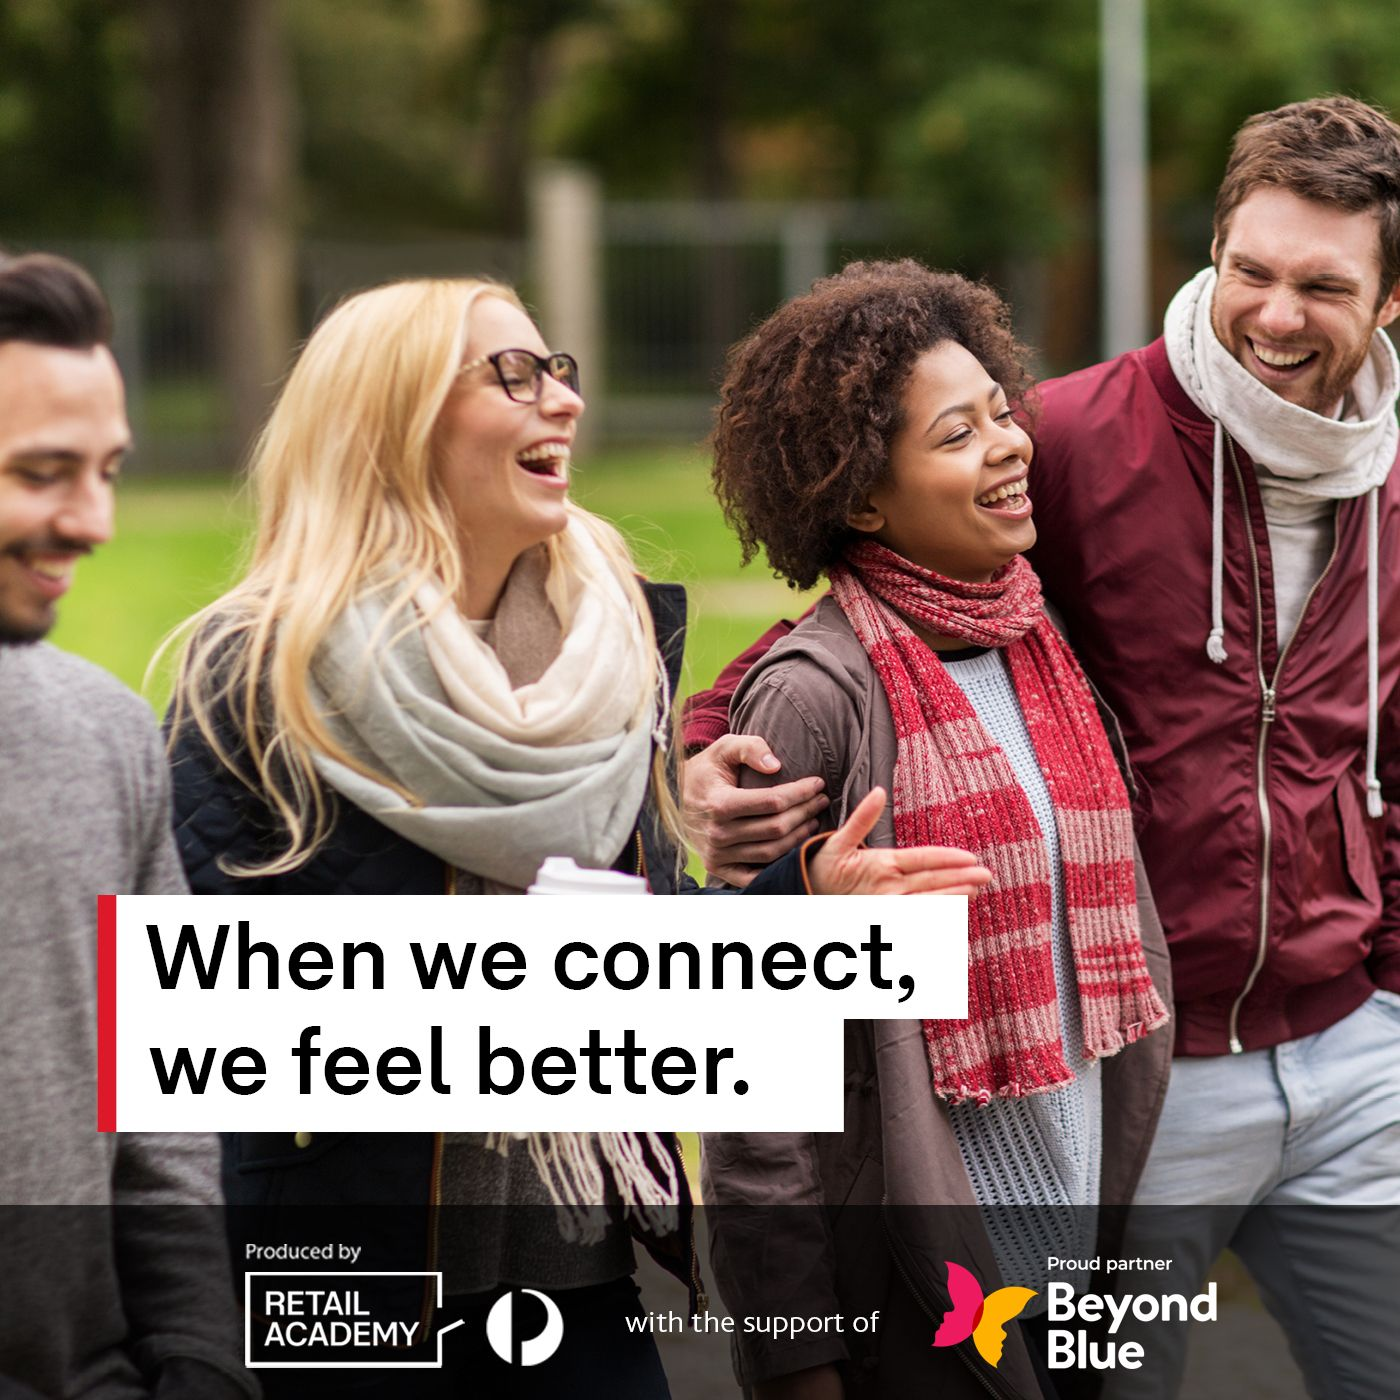 When we connect, we feel better